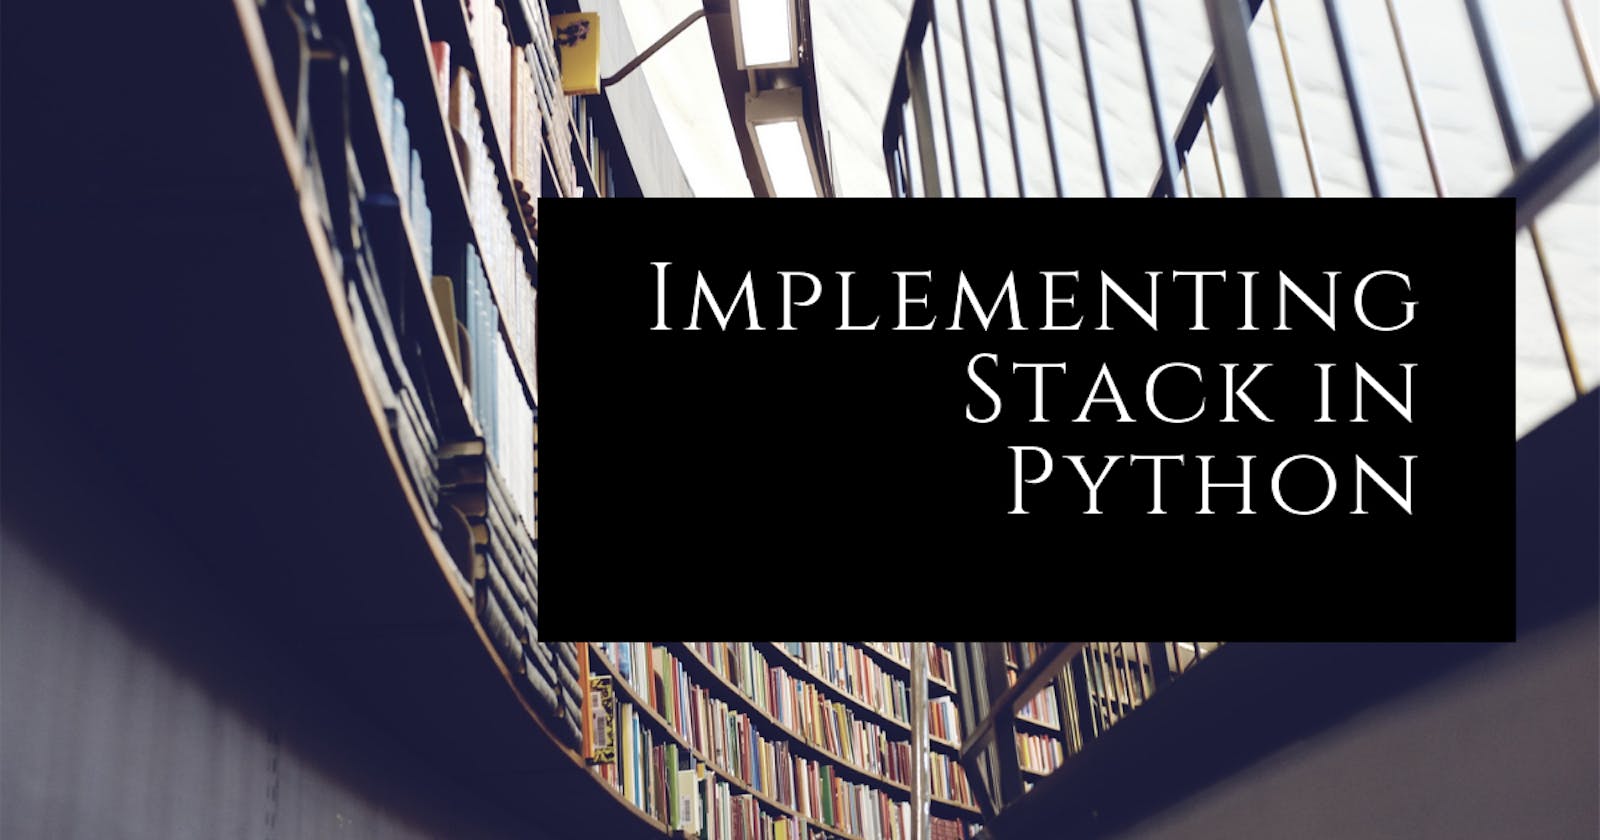 Implementing Stack in Python